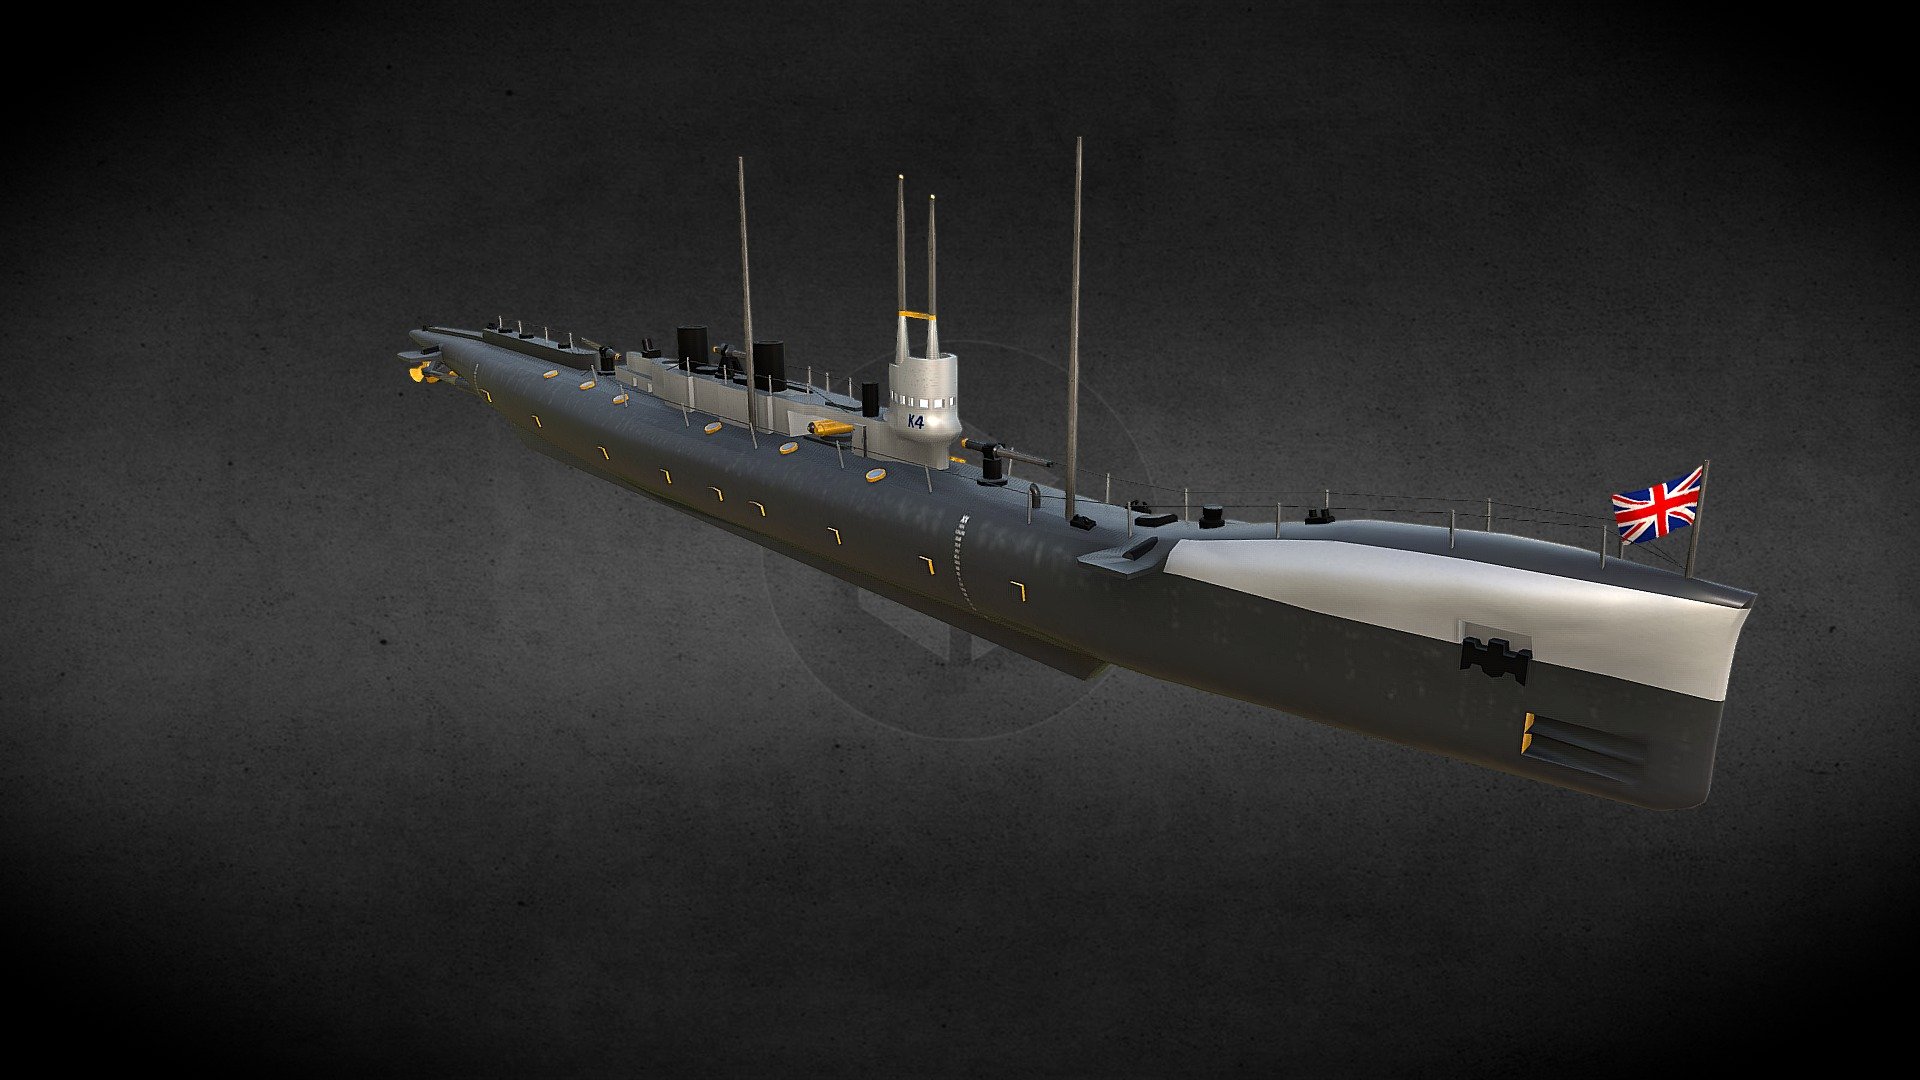 The package contains digital files of the 3D model - HMS K4 Texture.




Model Scale 1/1. Length 103,8m (340ft 6.6in).




The Model includes the following textures PBR:

Texture resolutions: 2048 x 2048. (Diffuse.png, Normal.png, metalness.png, and rughness).



Notes: The .blend, .3ds, .fbx, .dae, .usdz, .glb and .obj files are each in their folders, accompanied by the textures, just open the files in the folders where the textures appear.

The file ‘HMS K4_Packaged.blend’ already contains the packaged textures, just click and open.

.................................................. .................................................. .............

Fully closed mesh. There are no N-gons in wireframe.

Created in Blender 2.90

.......................................................................................................................

This model is dedicated to 3D games and other 3D applications 3d model